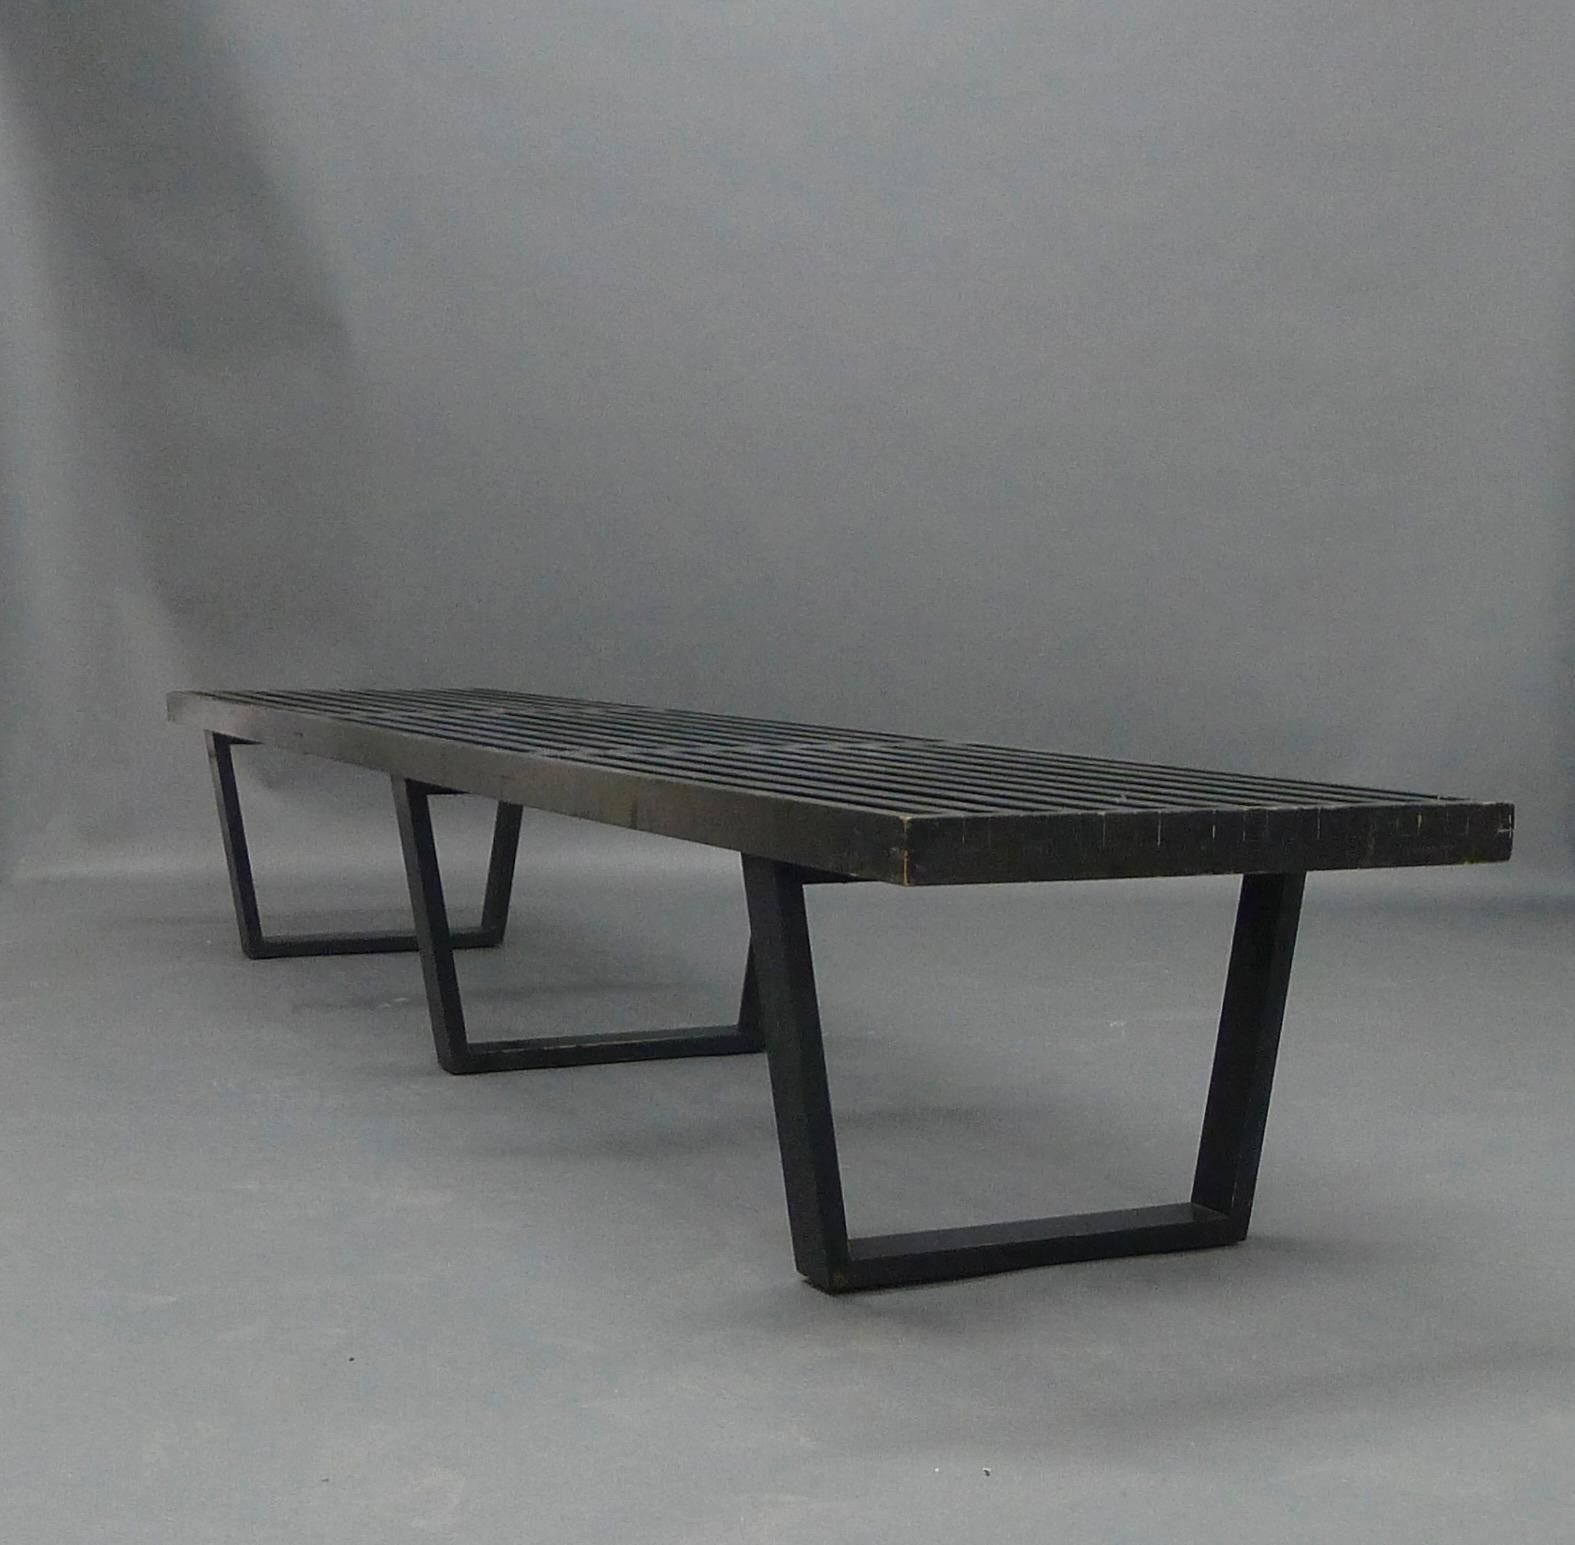 George Nelson, Platform Bench, for Herman Miller, late 1940s

Black painted birch frame, the slatted top on three curved supports,
235cm wide, 47cm deep, 36cm high

This is an original authentic piece, and a rarer long version with three legs rather